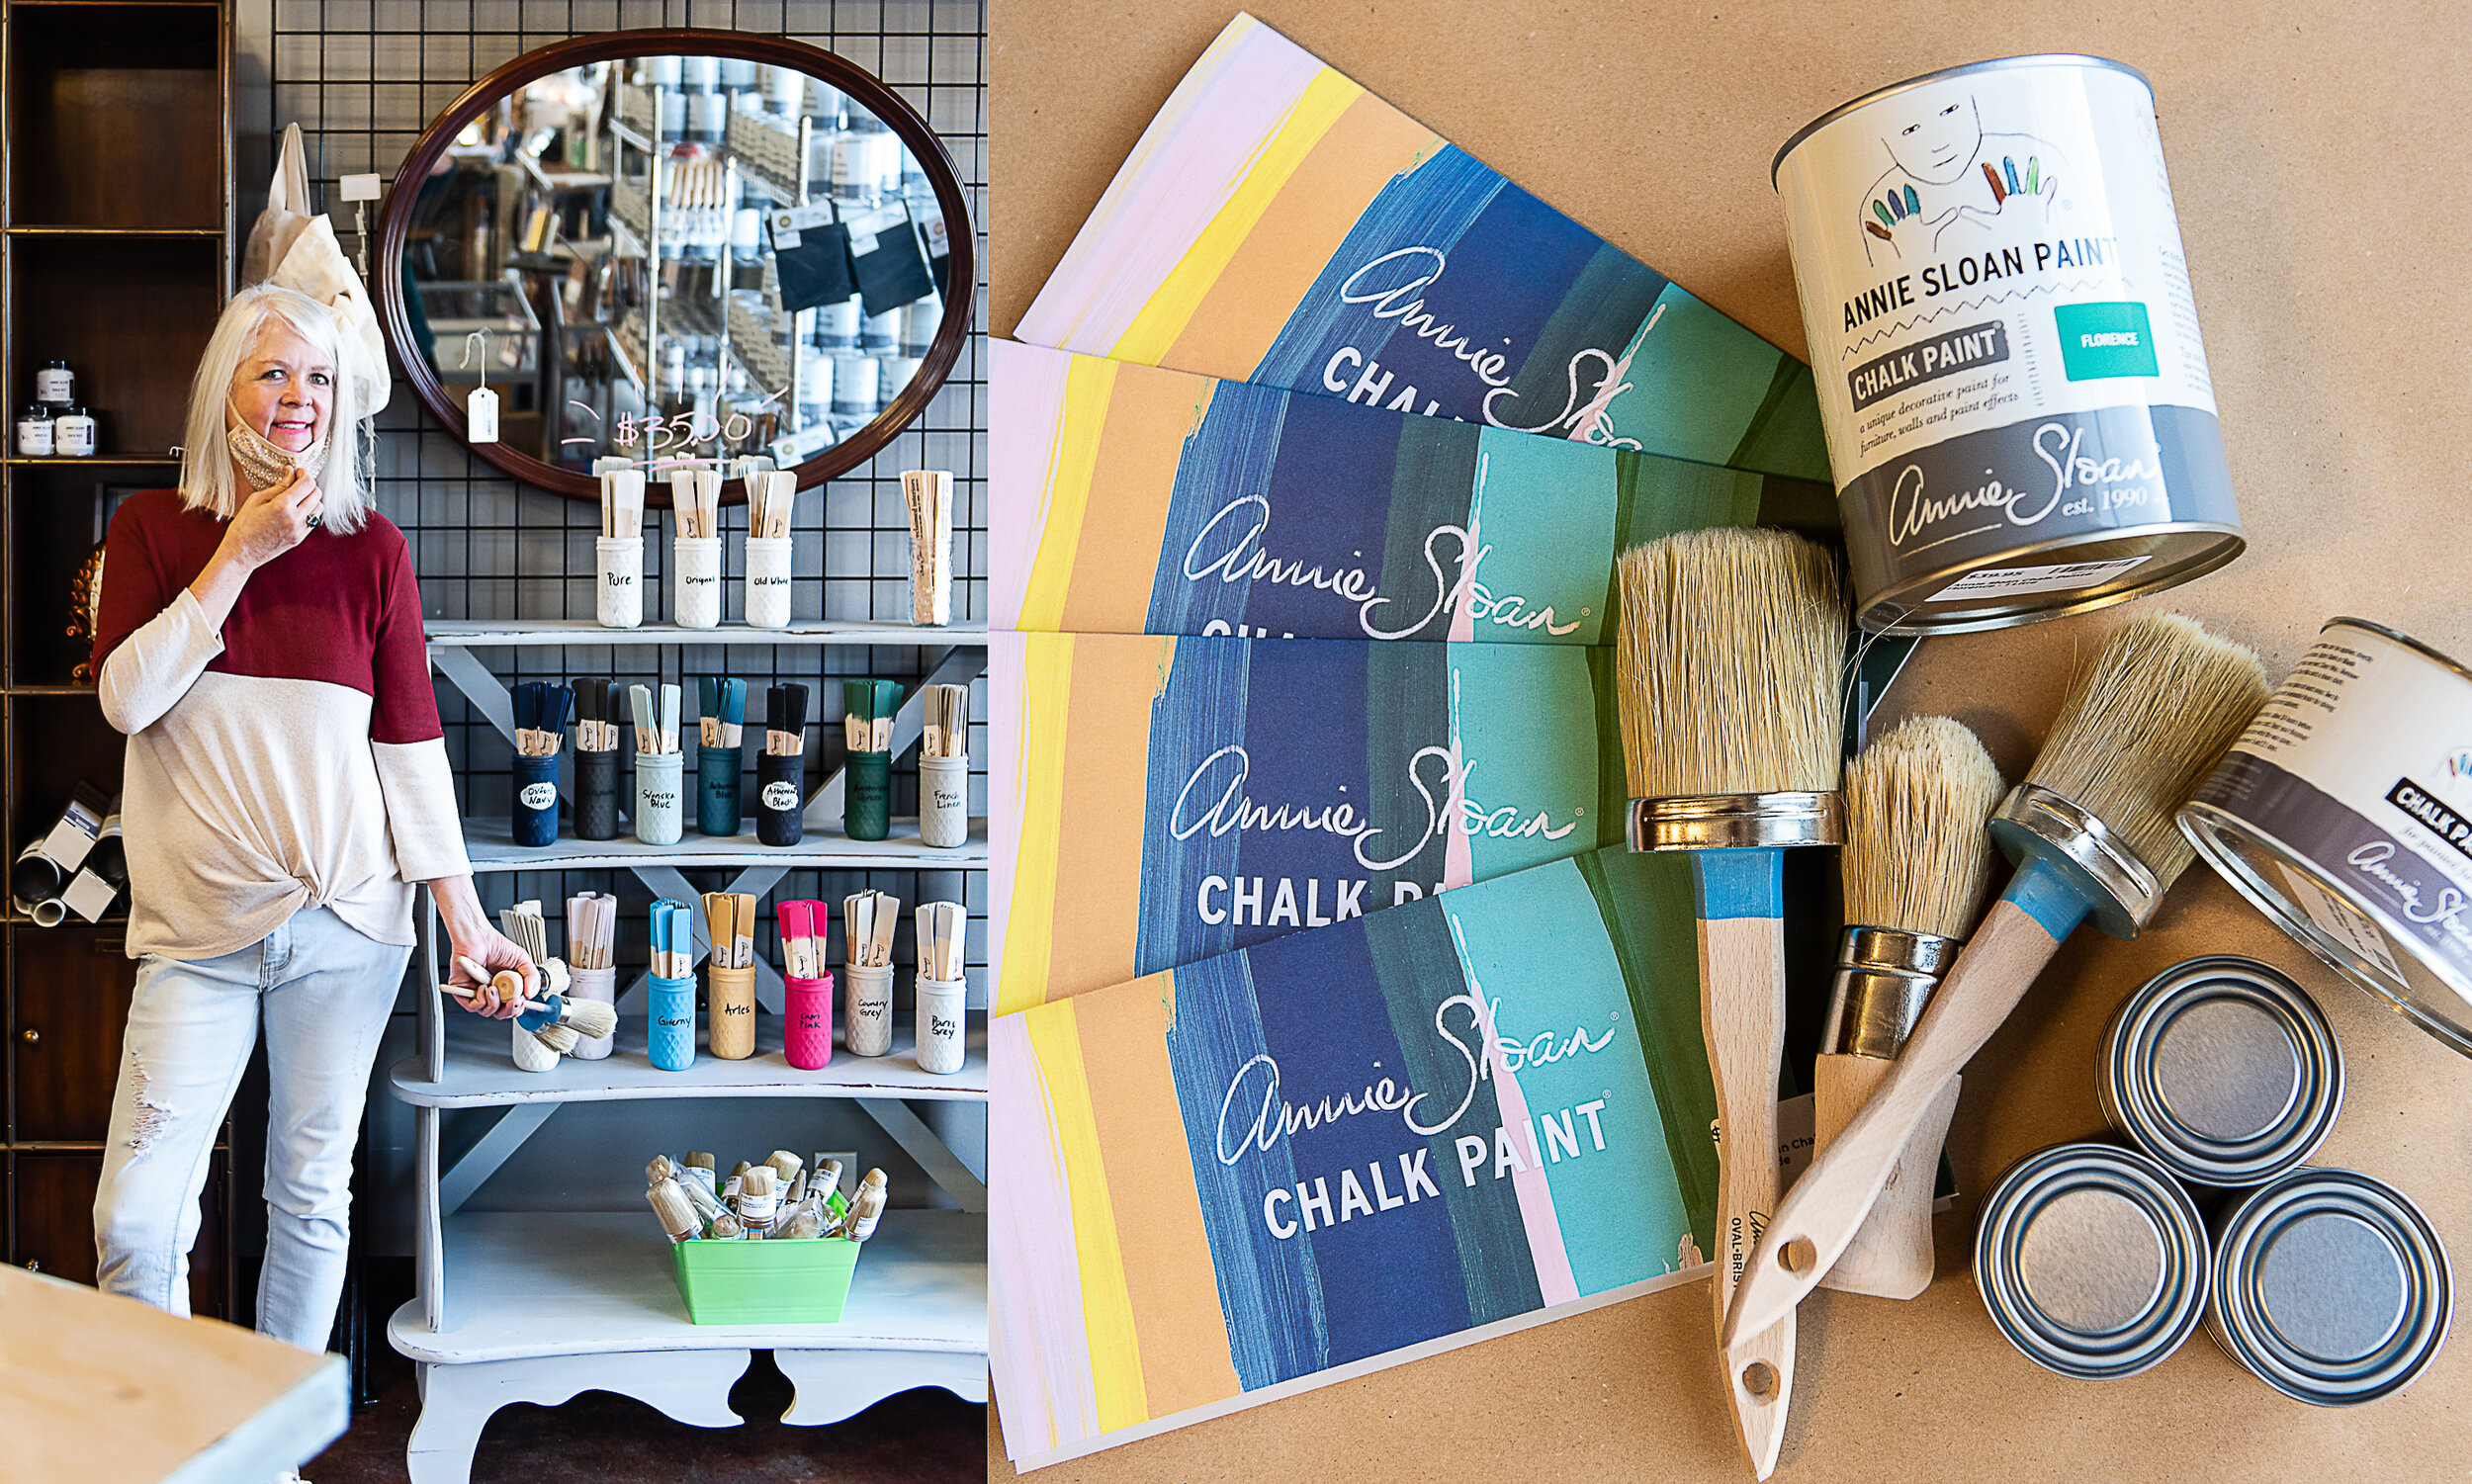 Annie Sloan Chalk Paint - My Tips - Finding Silver Pennies